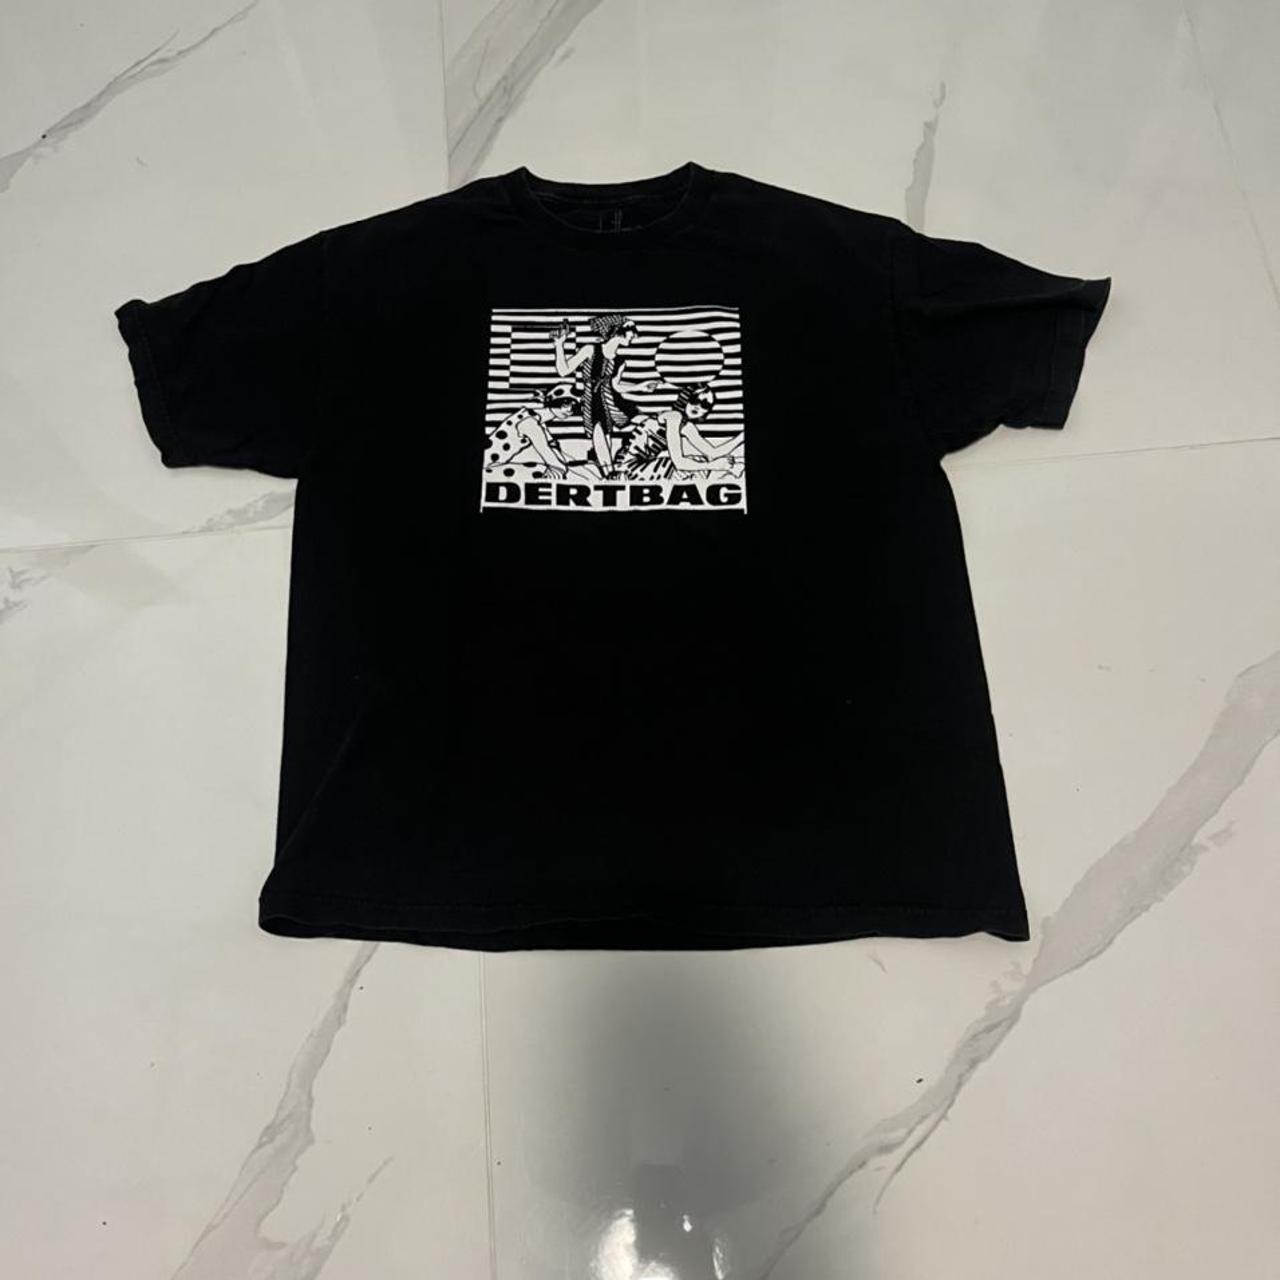 Product Image 1 - Authentic Dertbag USA stripe tee